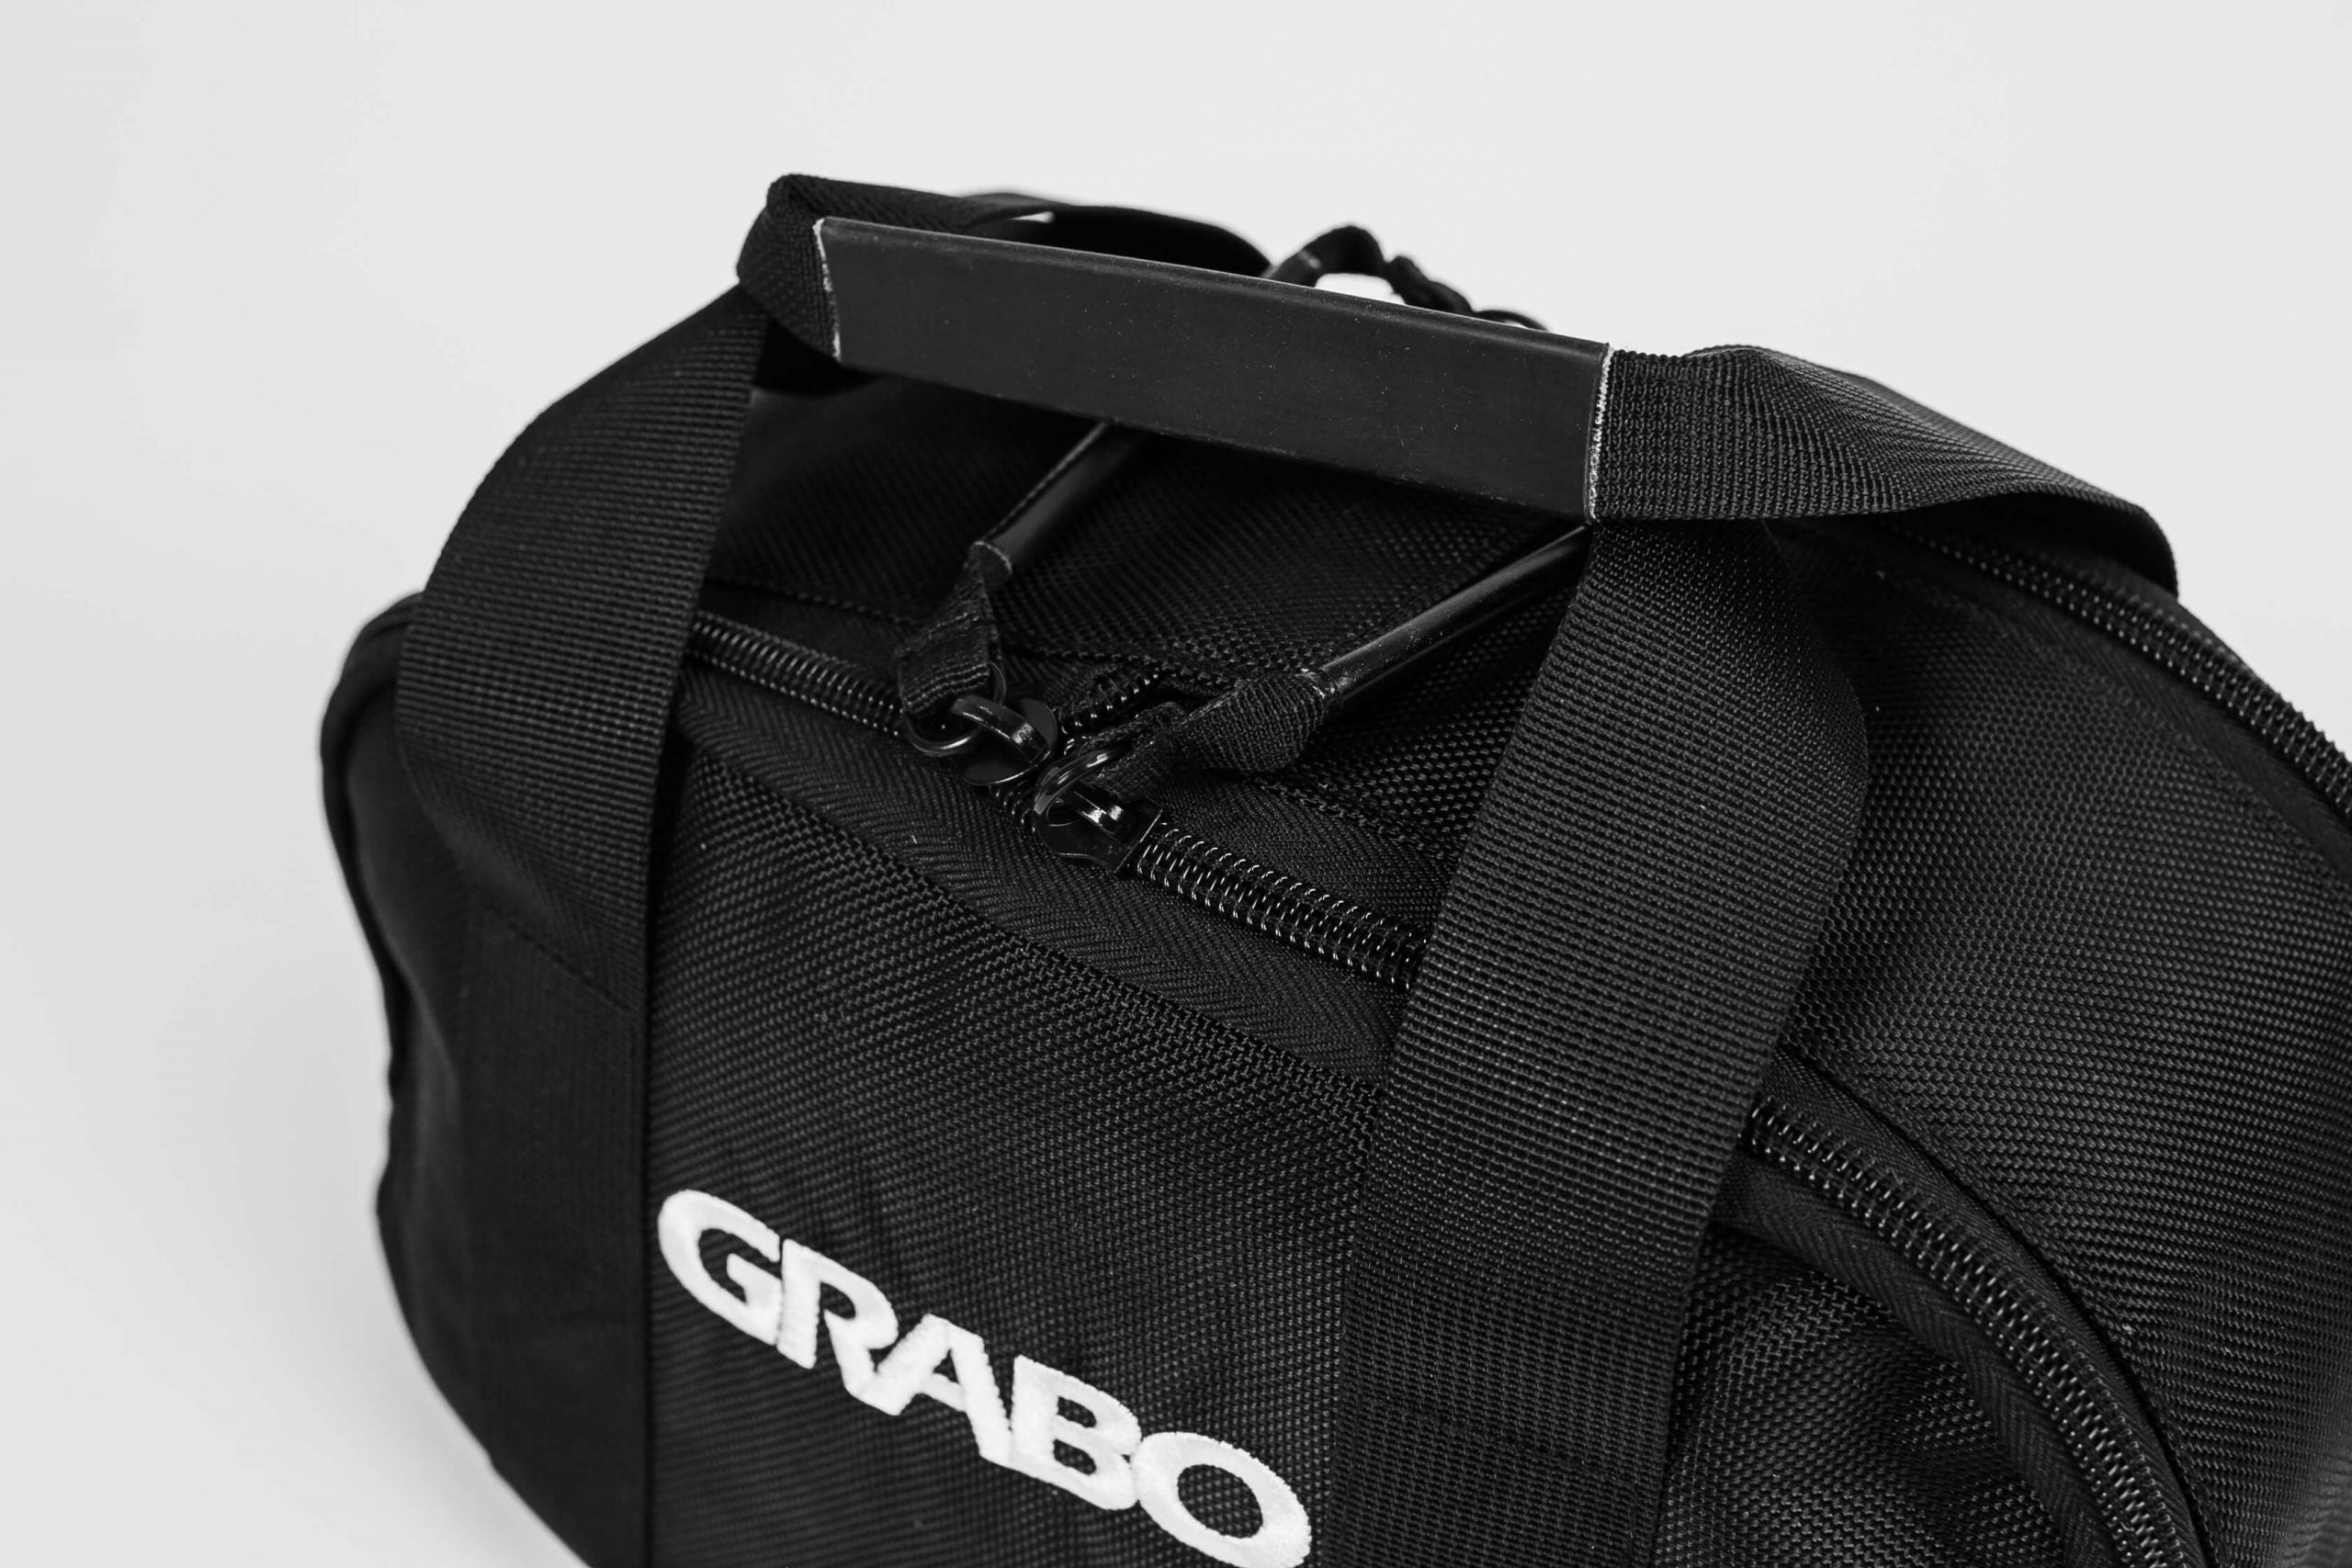 Nemo GRABO Classic - The electric suction cup - GRABO Carrying Bag